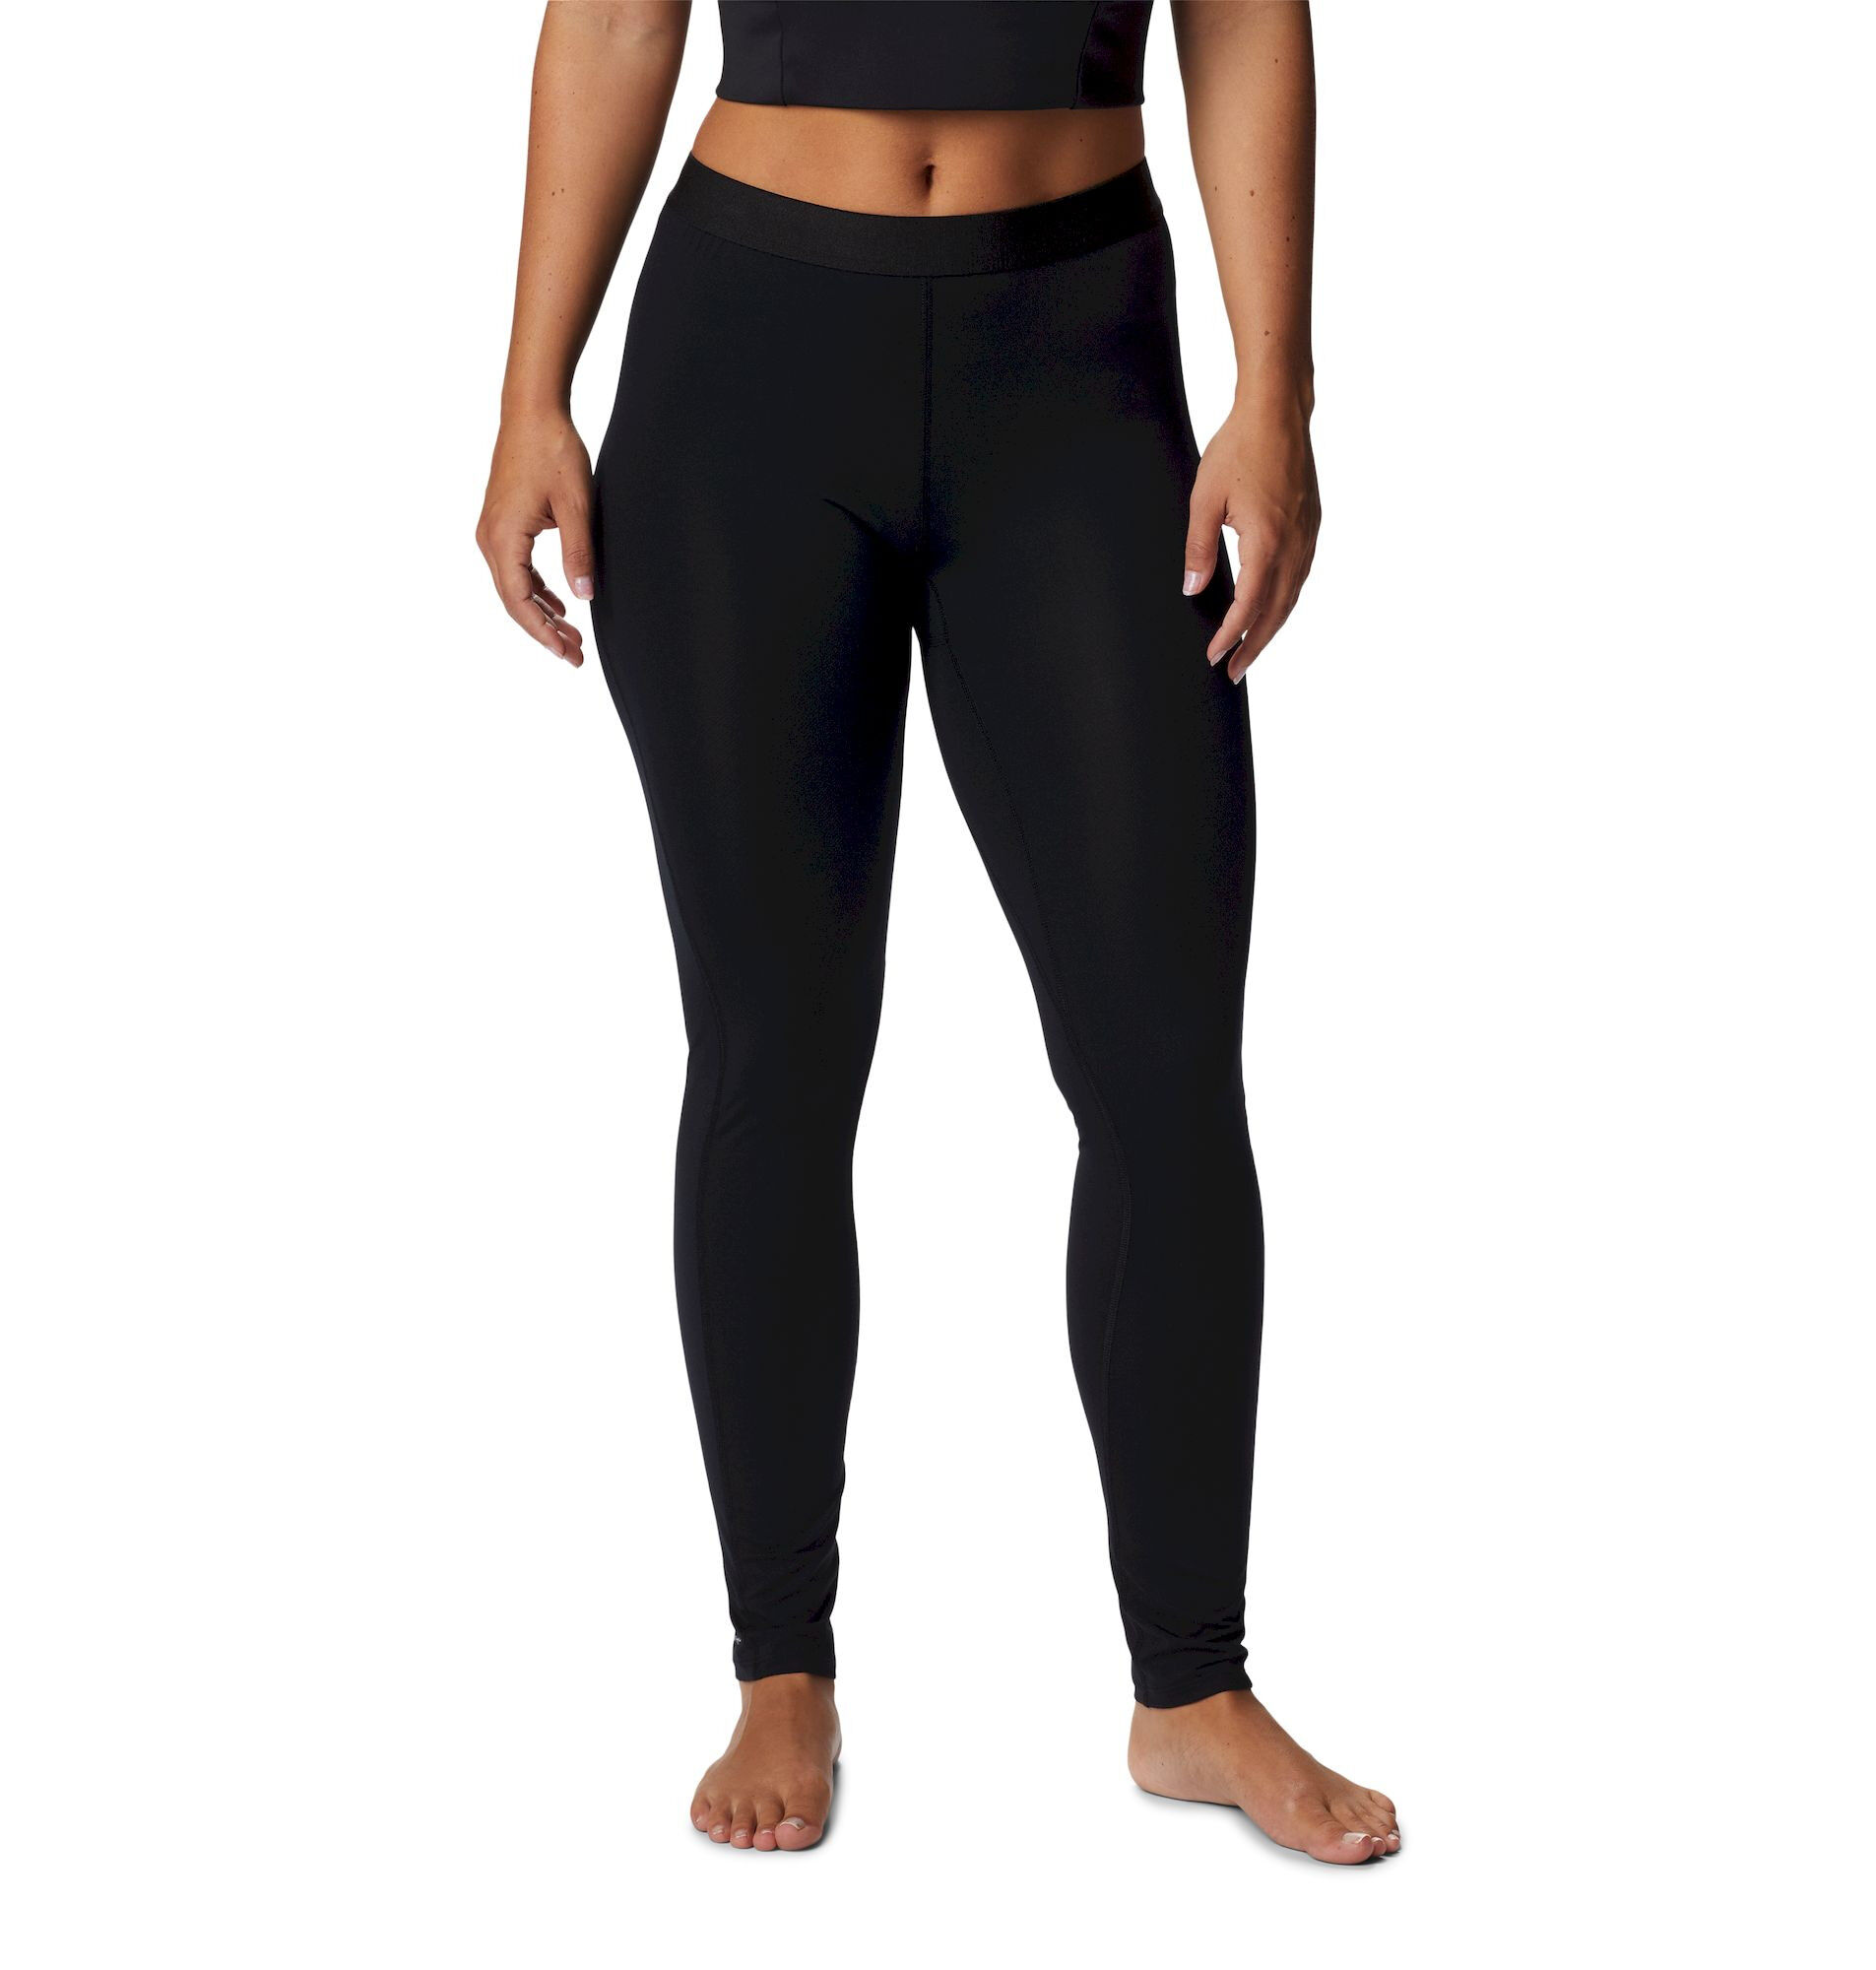 https://images.hardloop.fr/490819/columbia-midweight-stretch-tight-collant-thermique-femme.jpg?w=auto&h=auto&q=80